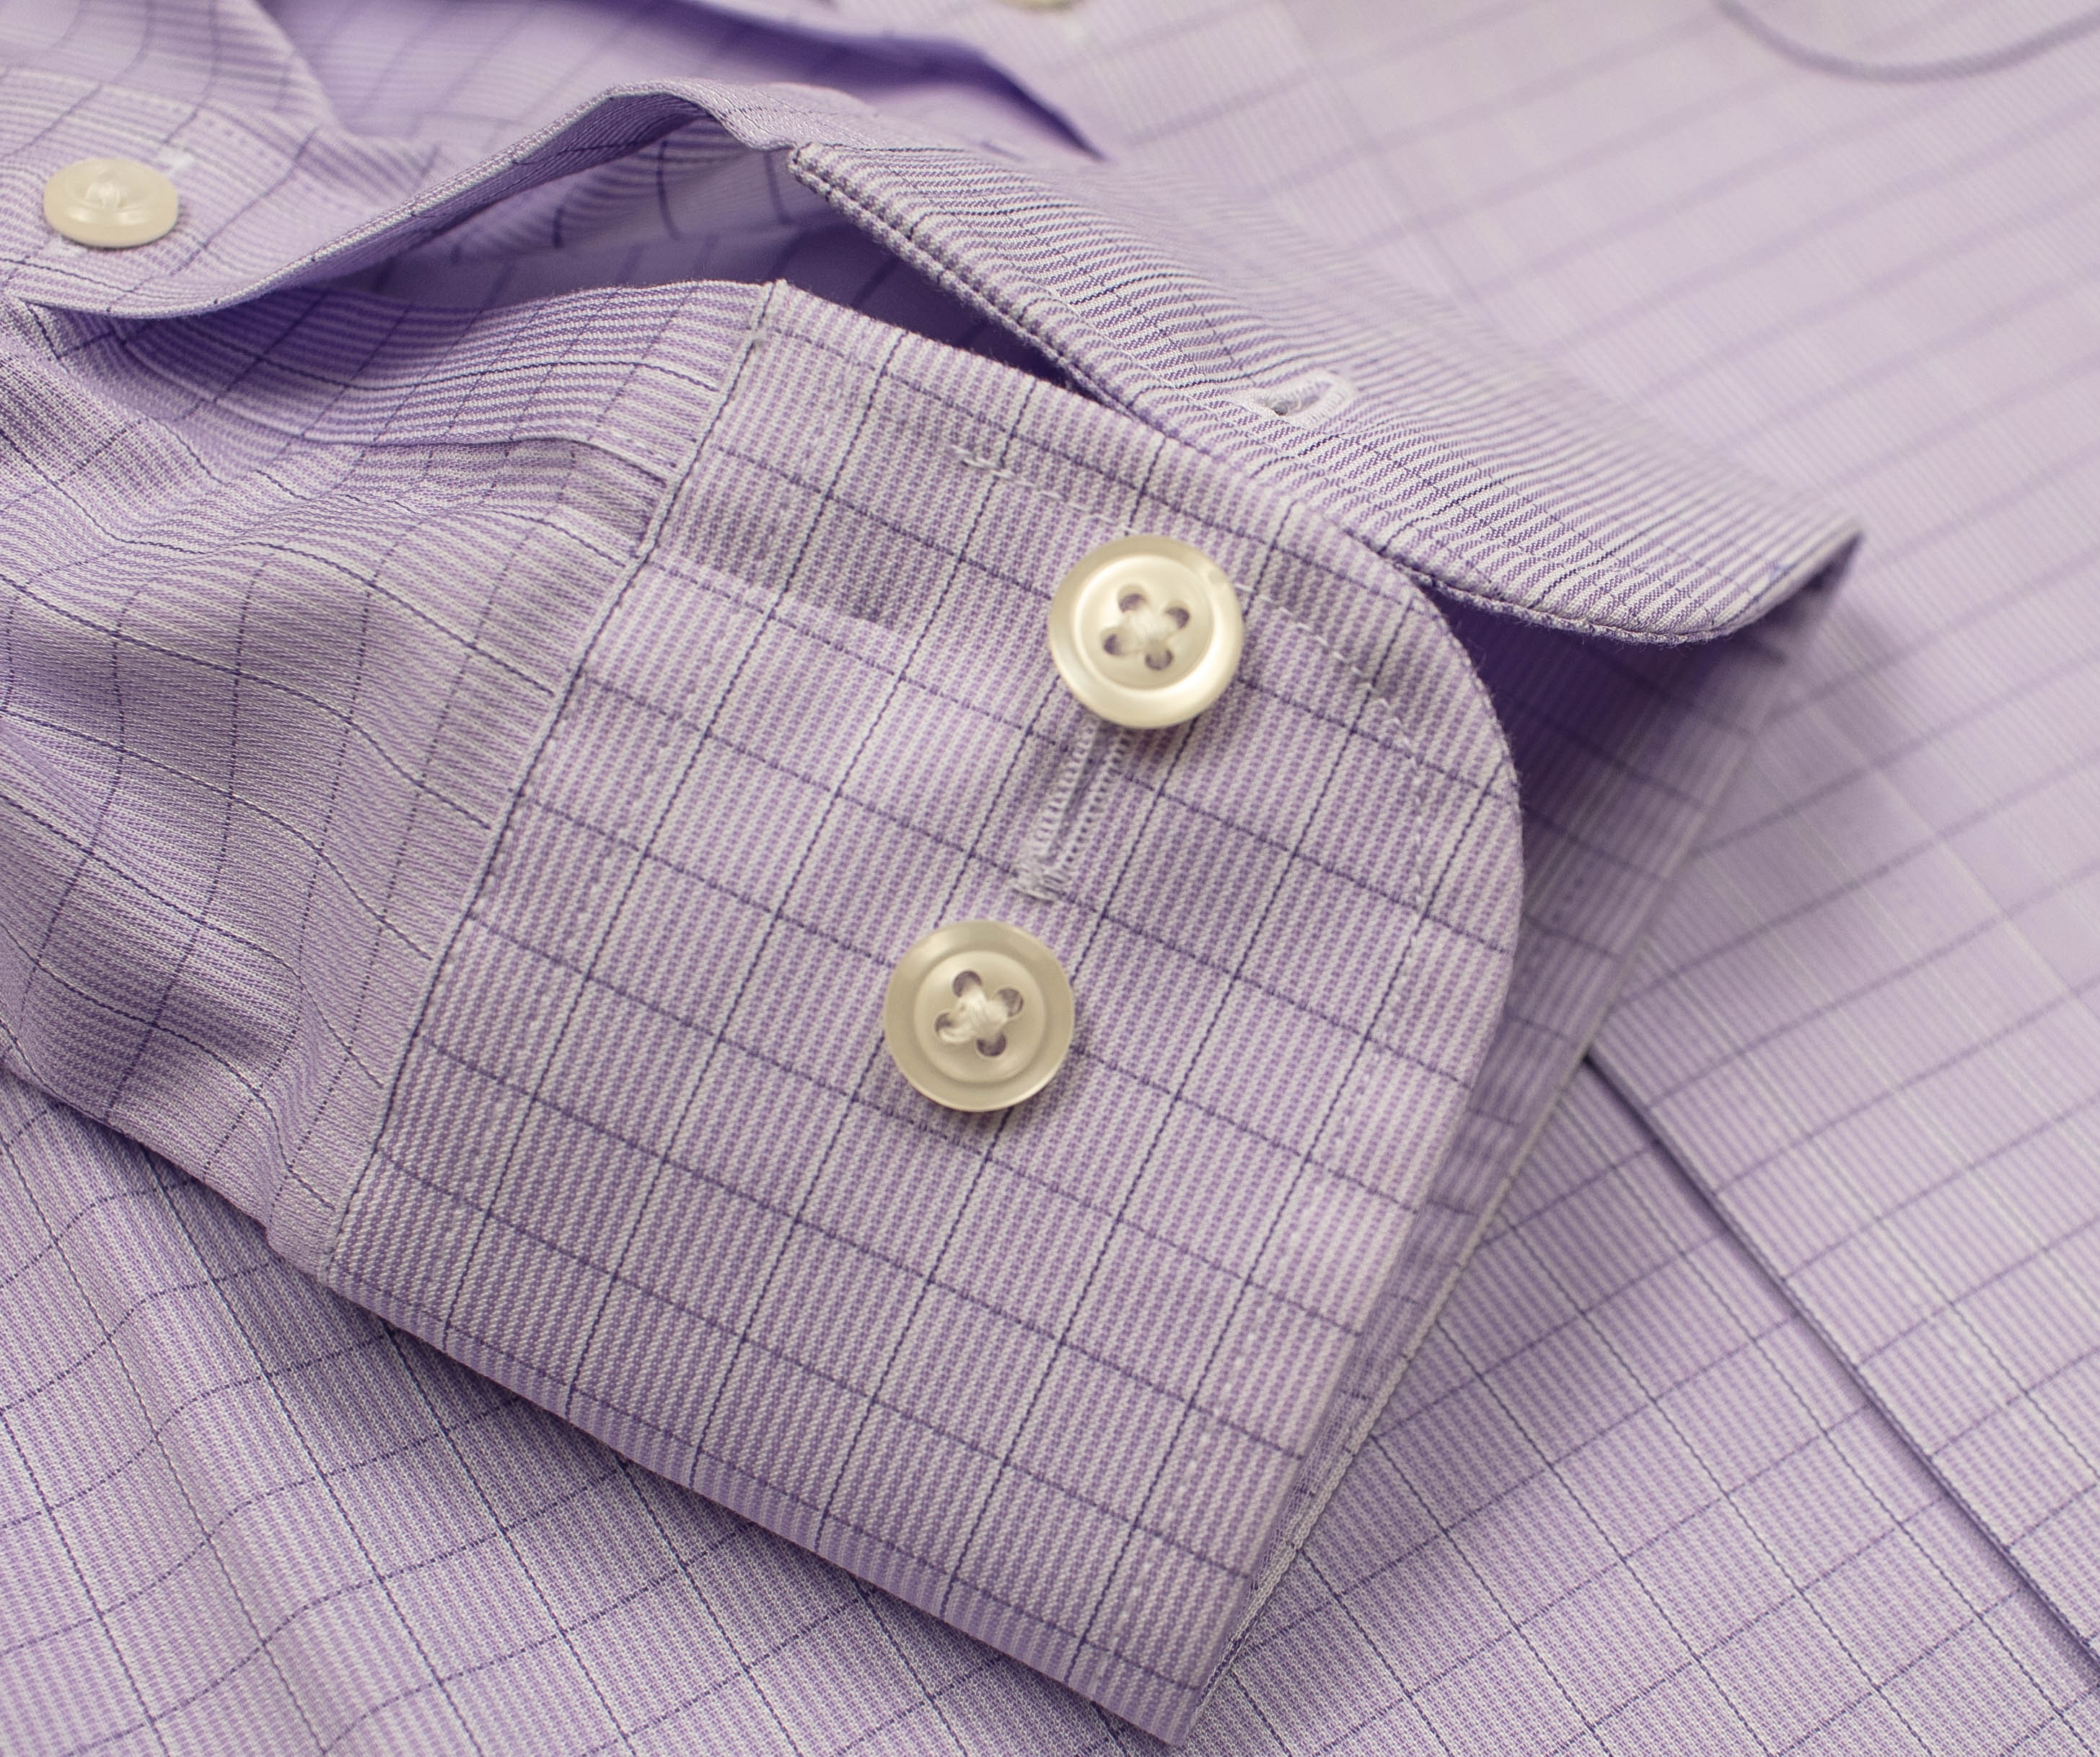 098 TF BD - Lavender Grid w/Overlay Check Tailored Fit Button Down Collar